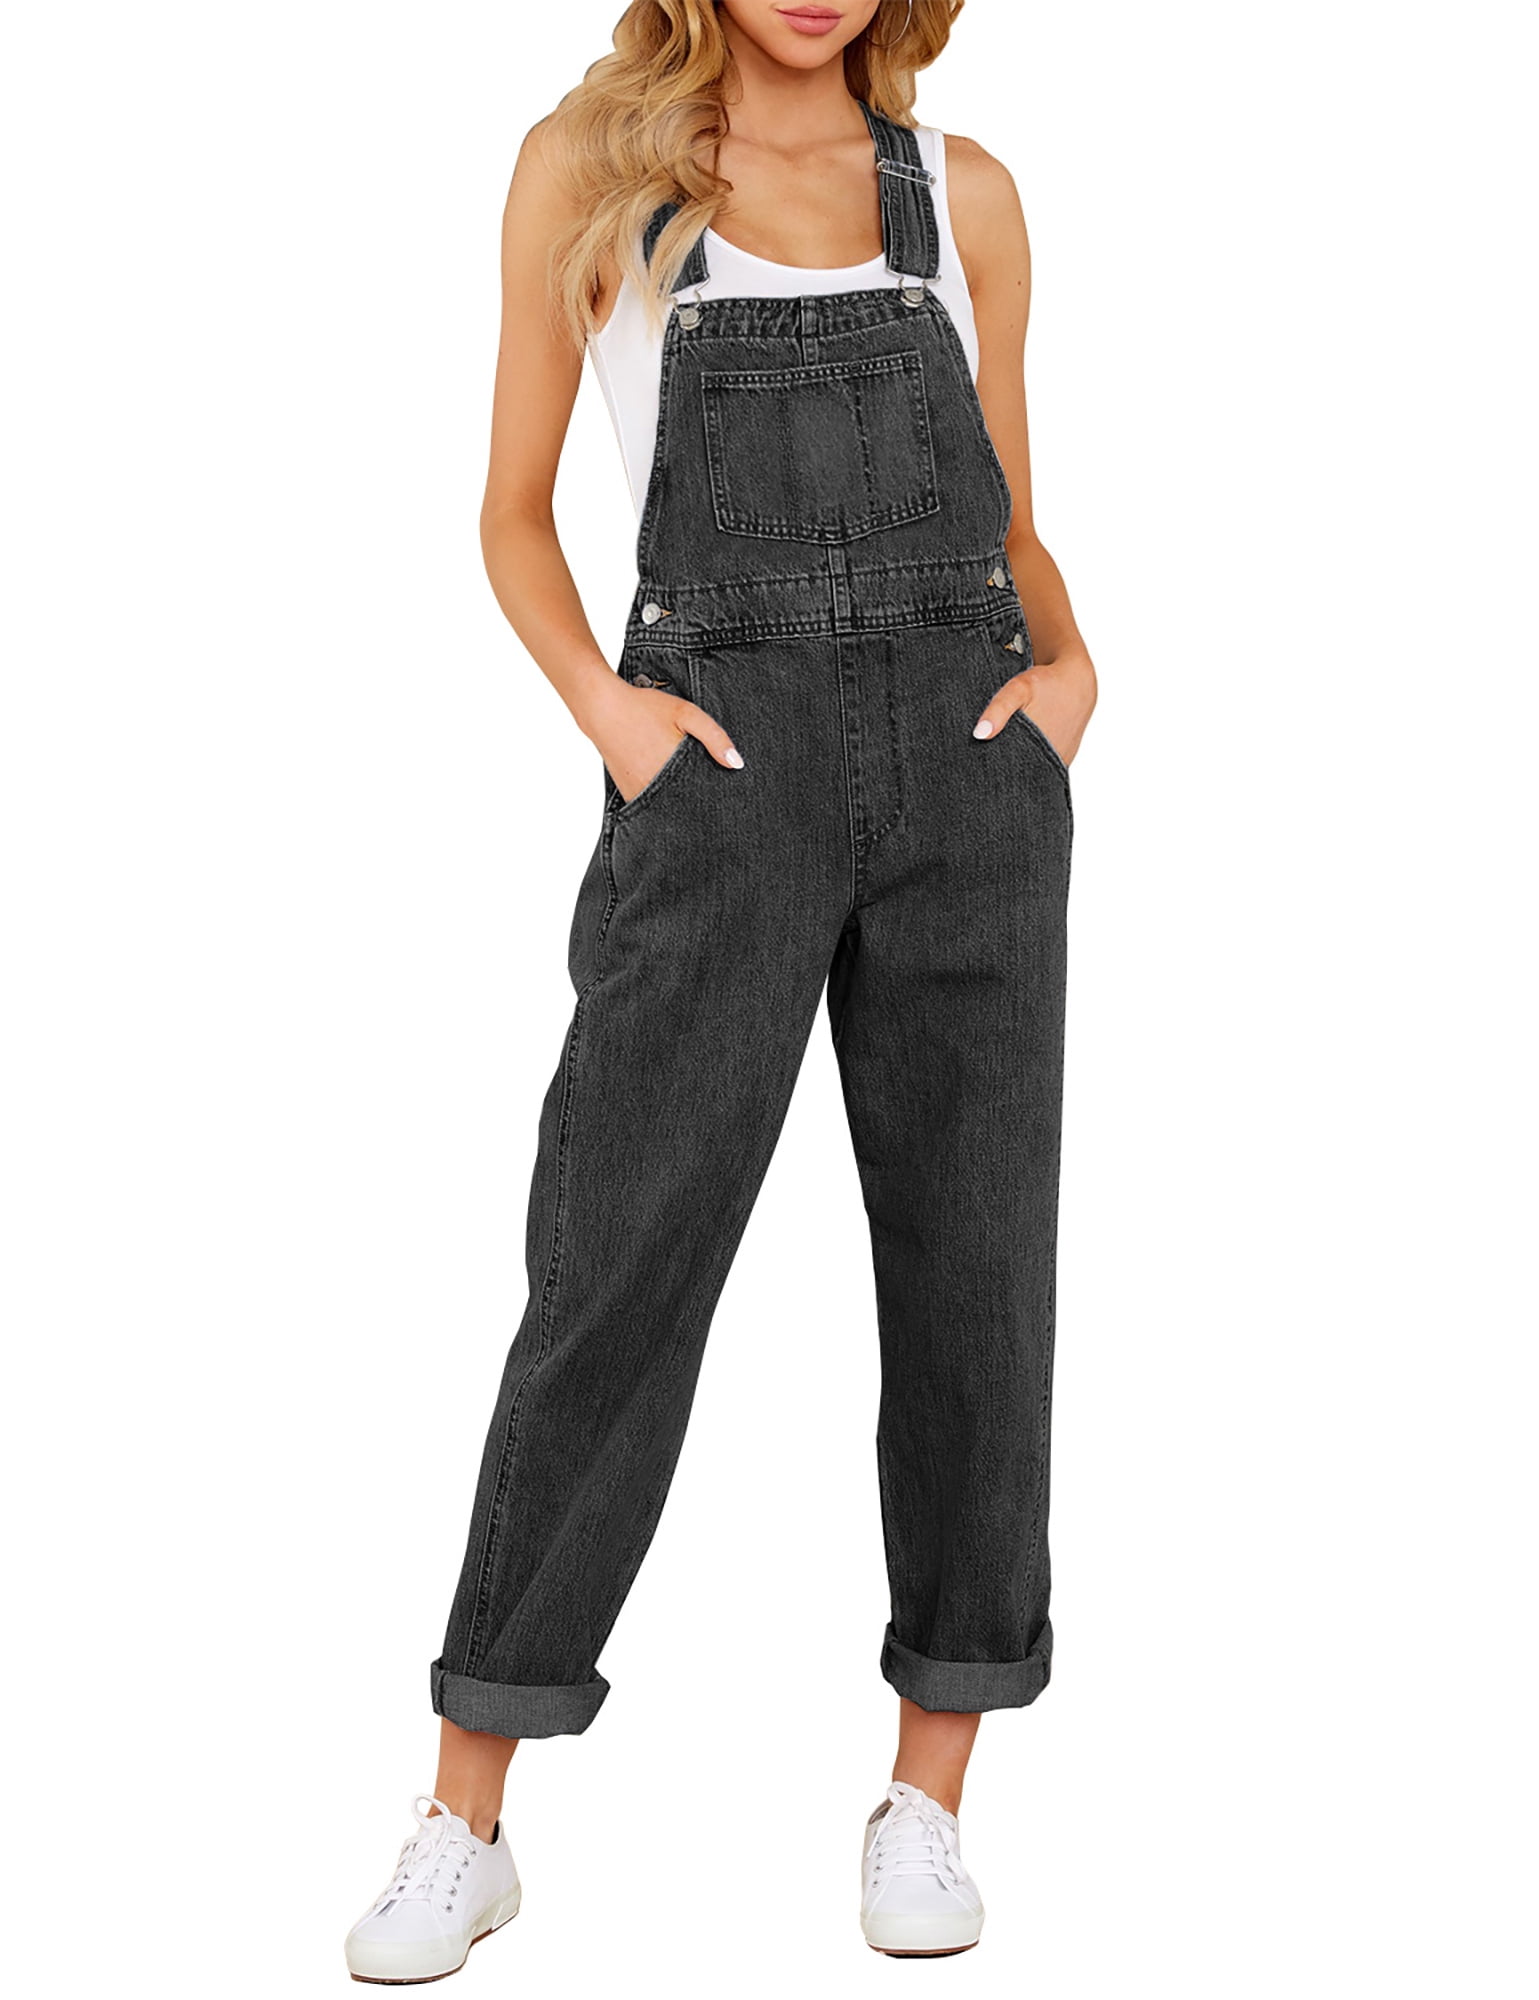 Buy Vovotrade Women's Denim Jumpsuit Overalls Playsuit Slim Jeans Pants  Ripped Straps Trousers X-Large Black at Amazon.in